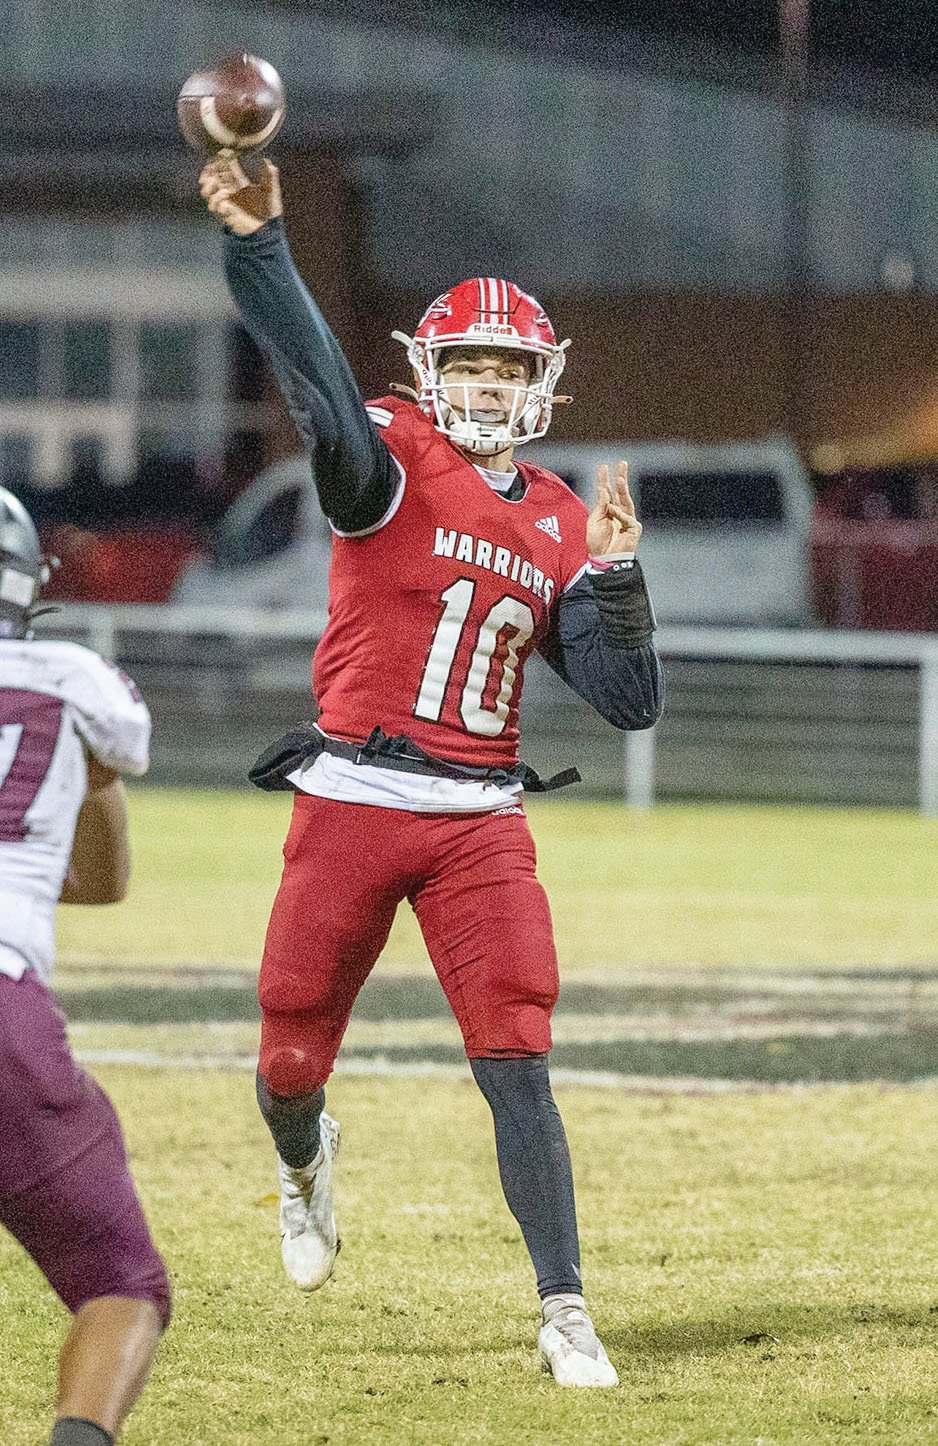 Washington junior Major Cantrell fires off a pass during the Warriors’ 54-7 opening round playoff win over Atoka. Cantrell threw five touchdown passes in the game. Washington hosts Oklahoma Christian School Friday.